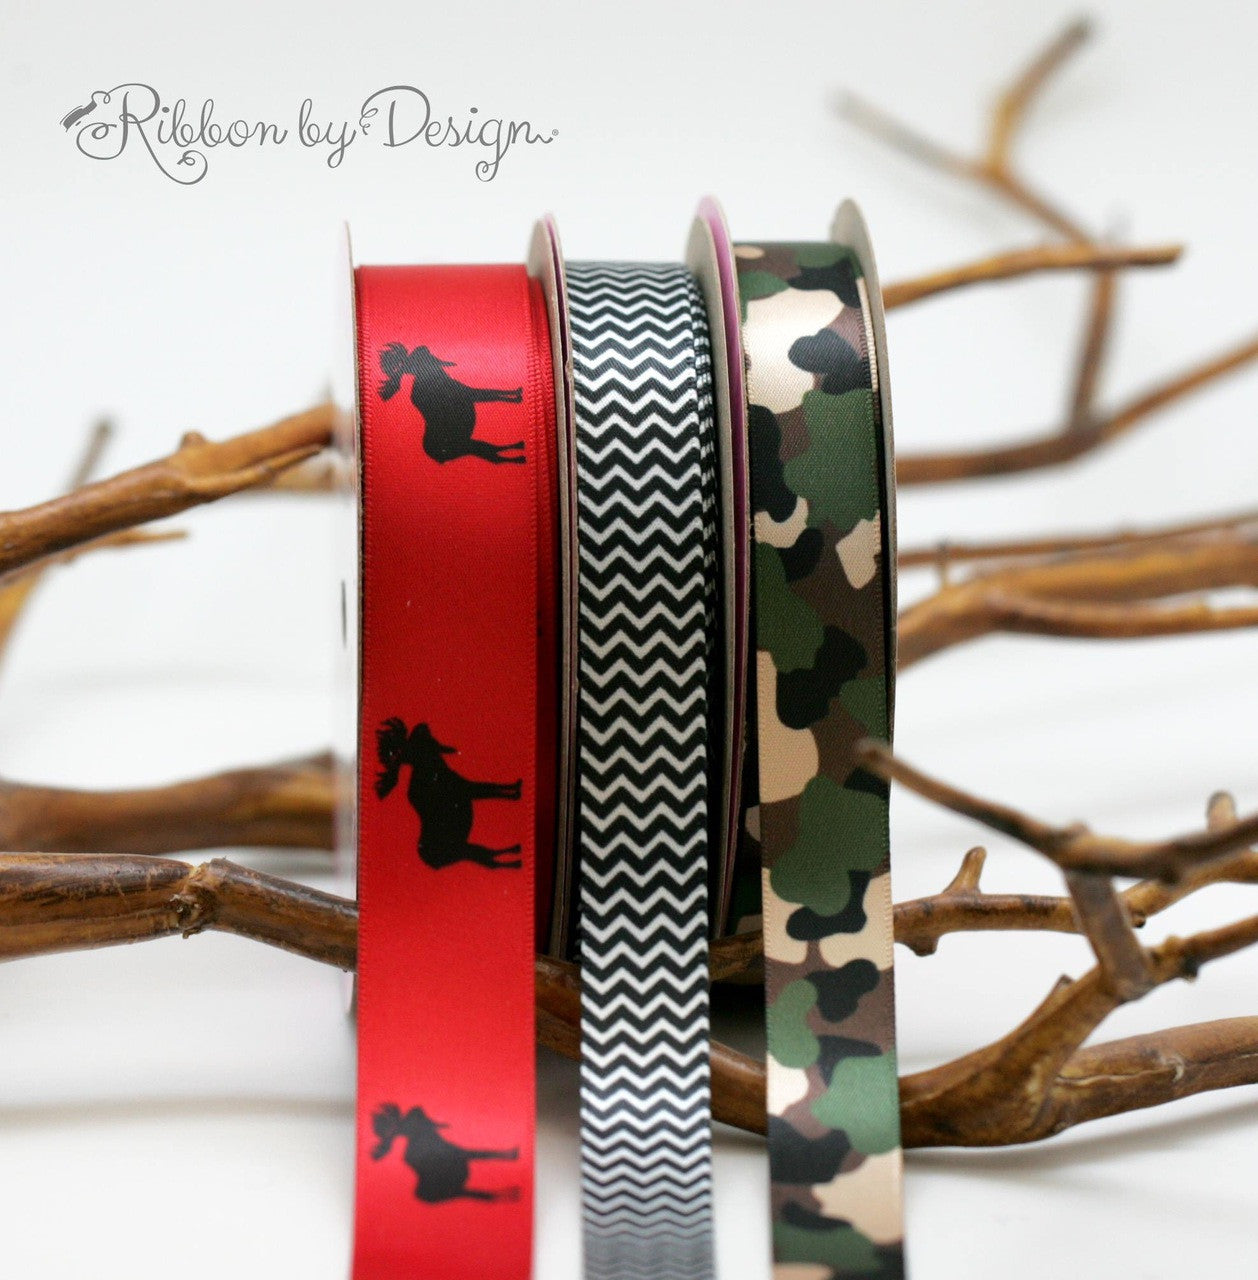 Paired with our Moose silhouette ribbon, our camouflage ribbon in green and tan makes a great Fall party theme!